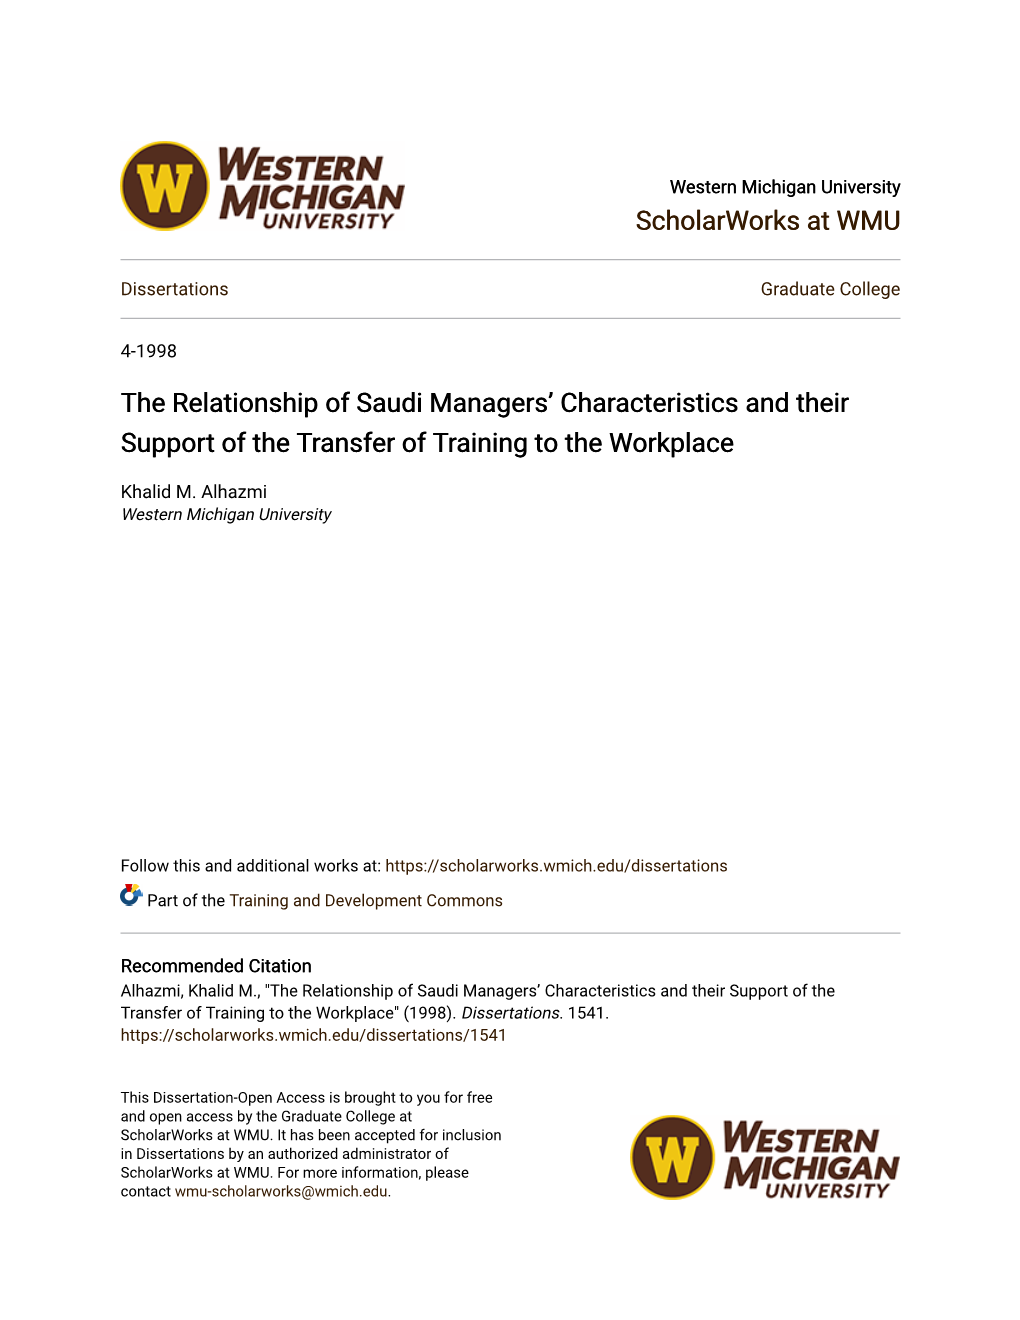 The Relationship of Saudi Managers' Characteristics and Their Support of the Transfer of Training To